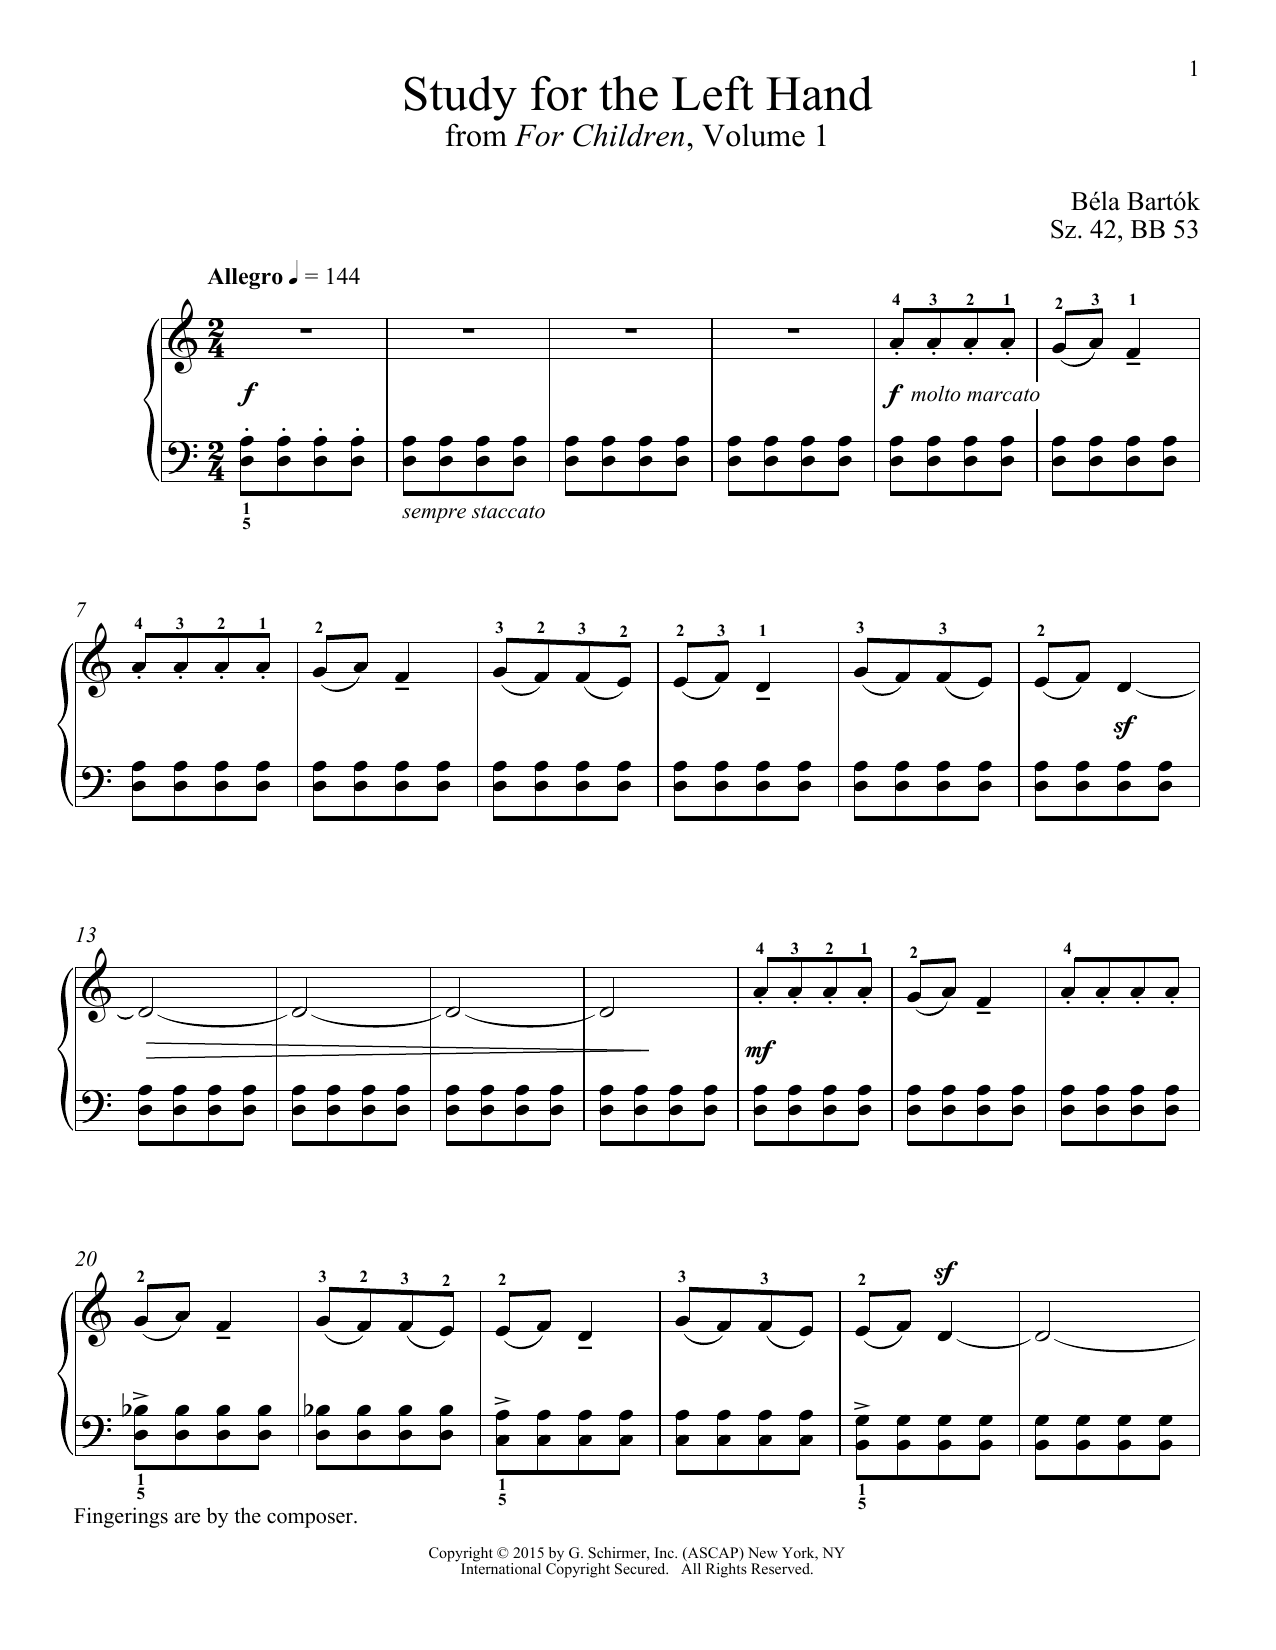 Download Richard Walters Study For The Left Hand Sheet Music